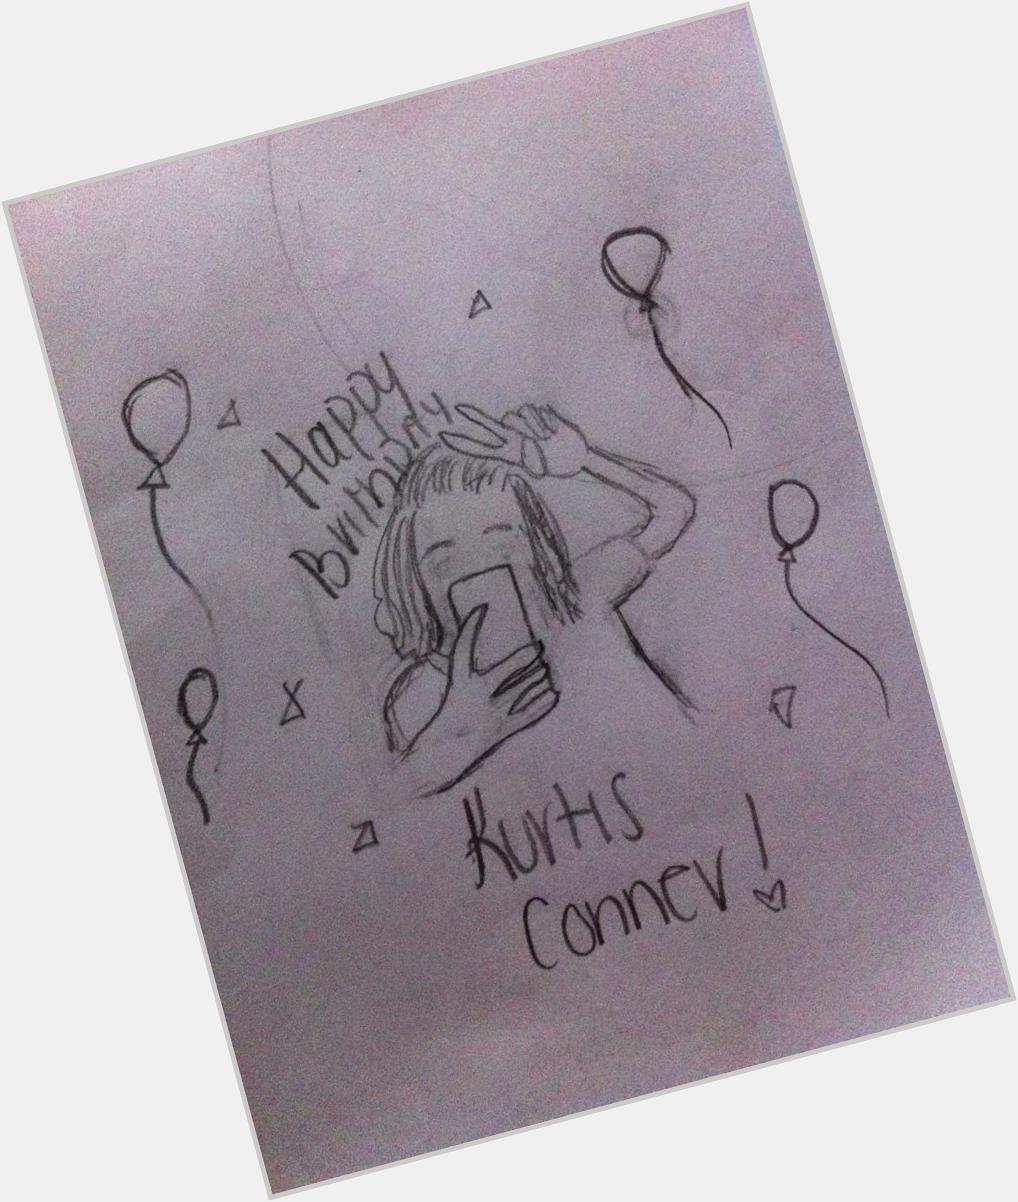  hAPPY BIRTHDAY!! sorry for the crappy drawing but hey I tried.. i love you lots and again happy bday 